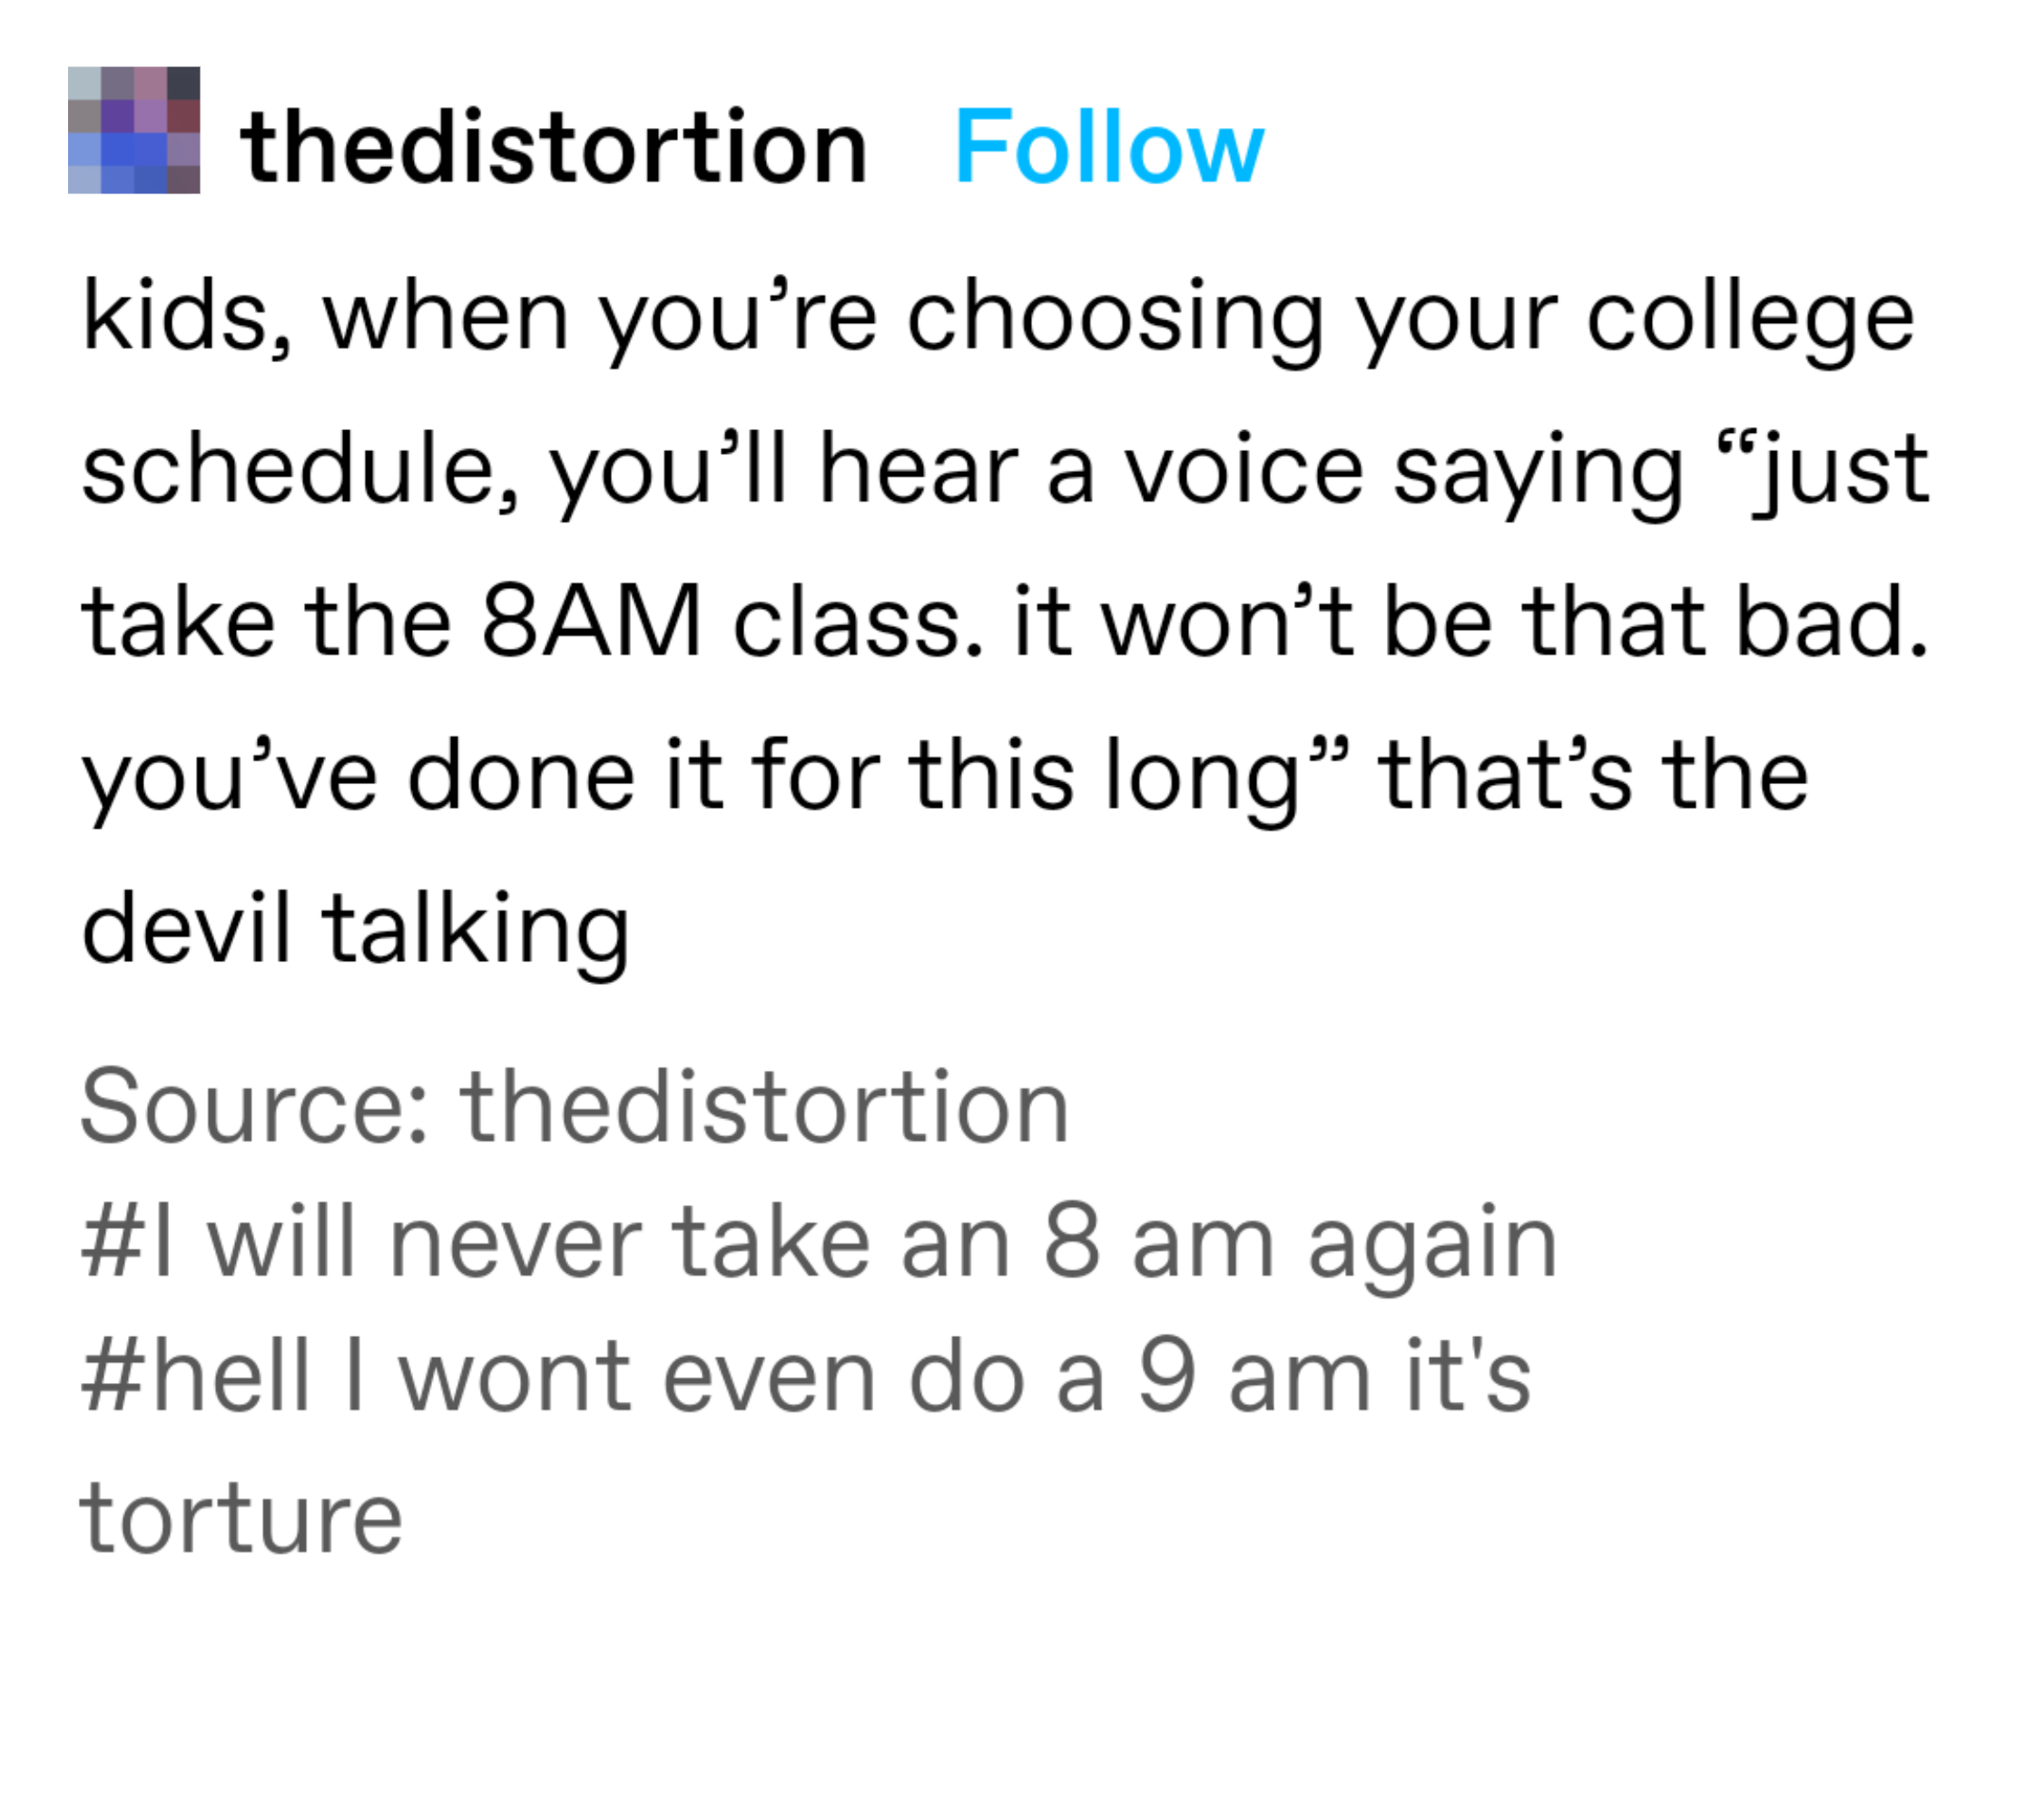 tumblr post about never taking an 8am class